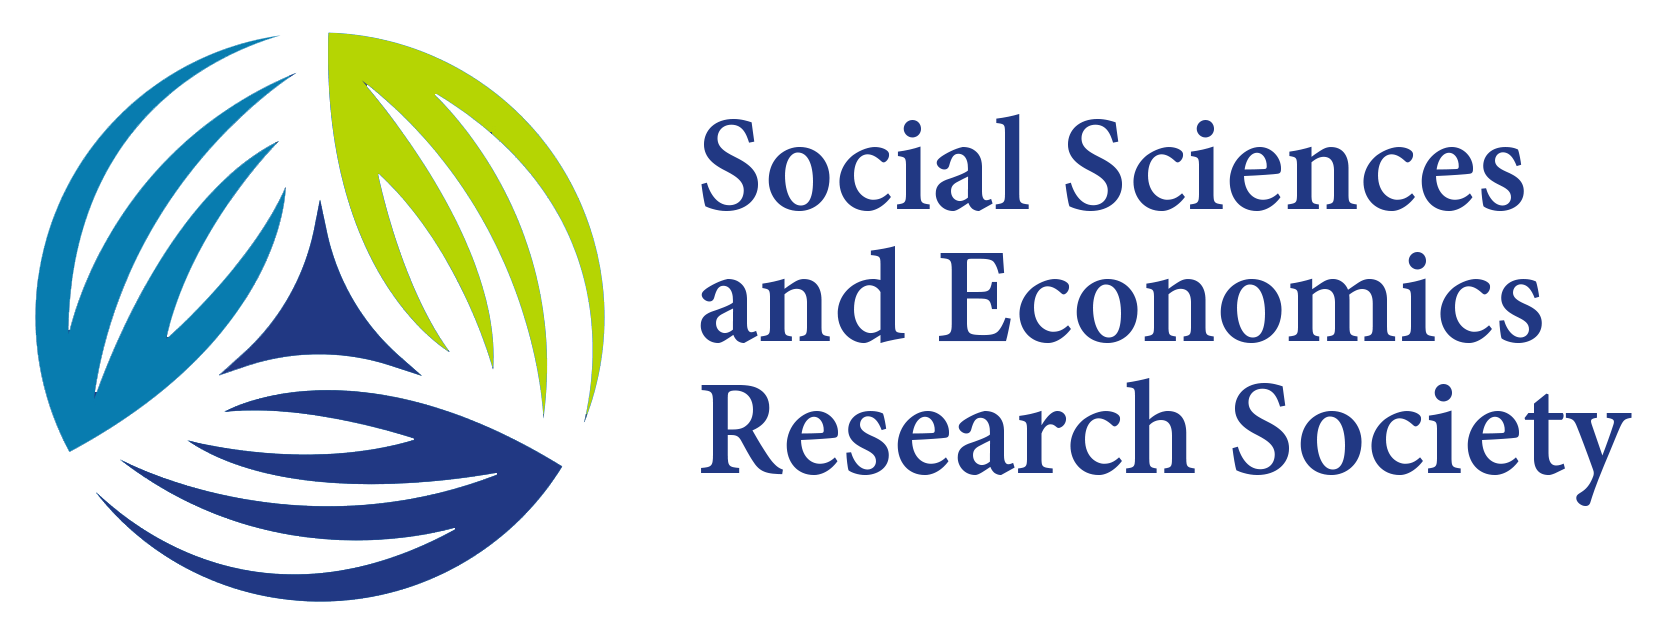 SSERS 2nd International Conference on  Emerging Market Trends in Economics, International Relations, Business Management & Social Science Research